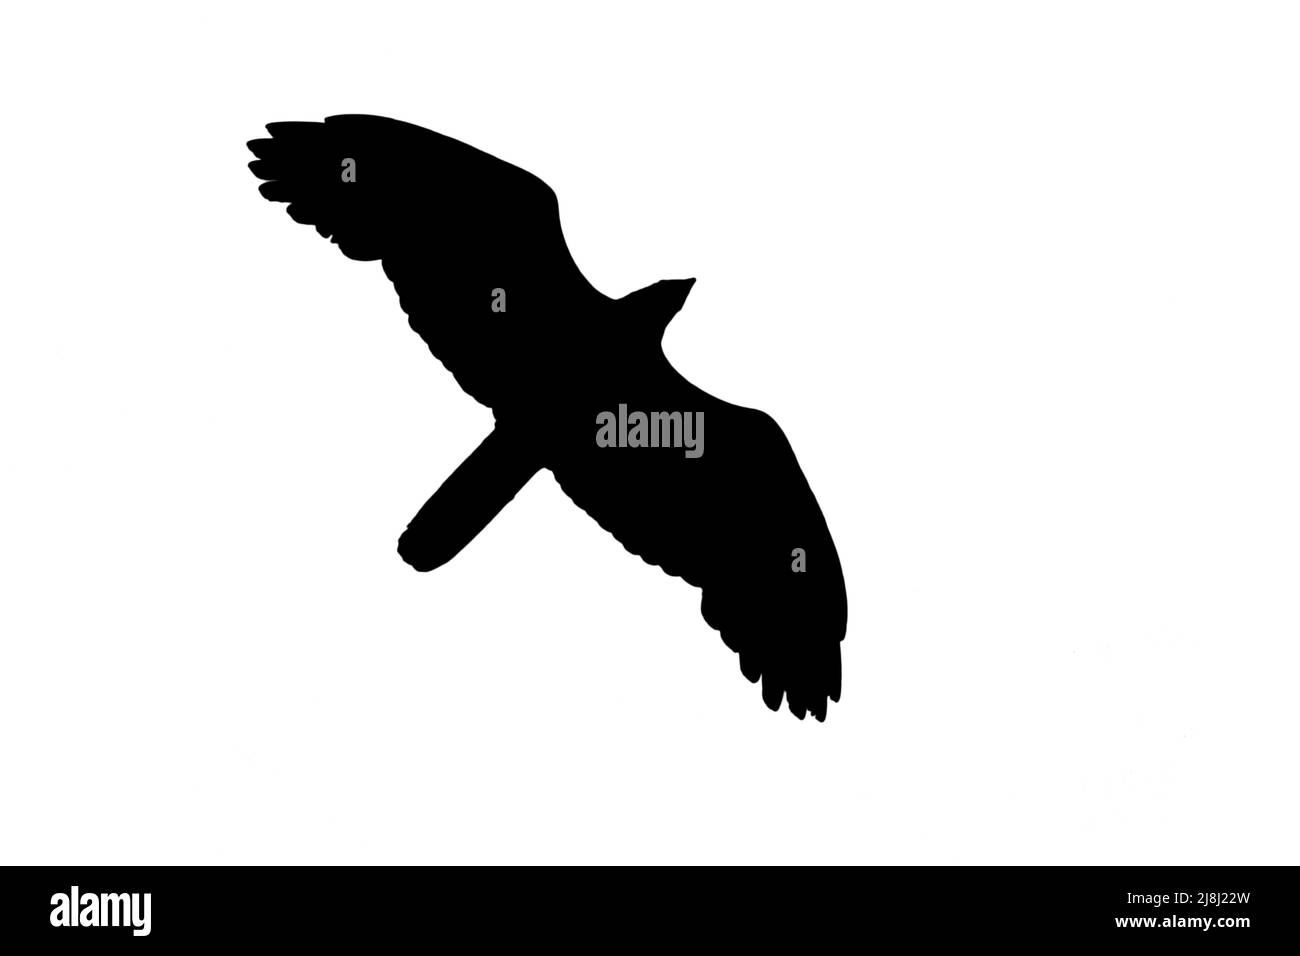 Silhouette of soaring European honey buzzard (Pernis apivorus) in flight outlined against white background to show wings, head and tail shapes Stock Photo